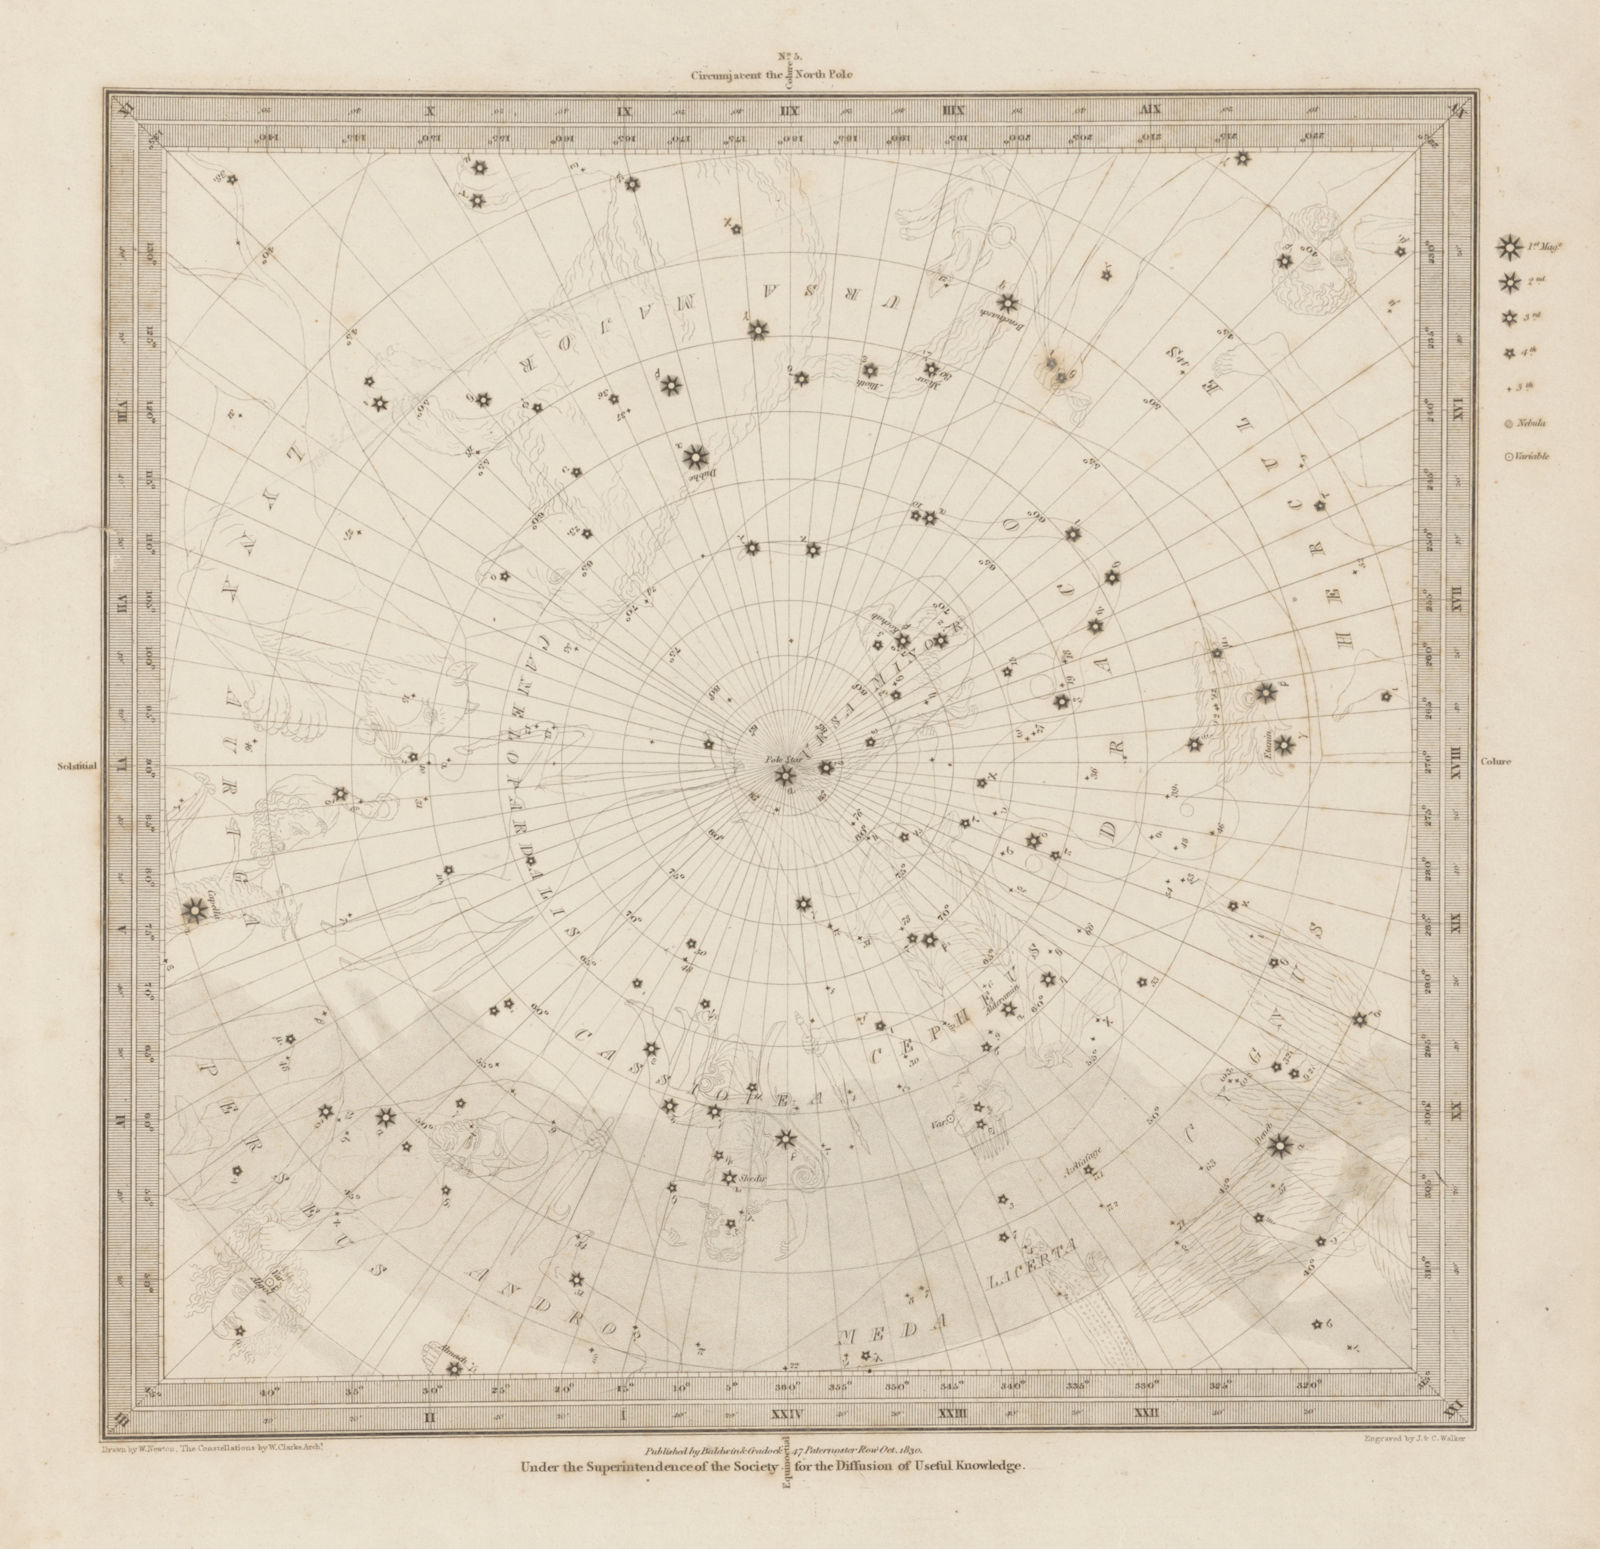 ASTRONOMY CELESTIAL Star map chart 5 North Pole. SDUK 1847 old antique